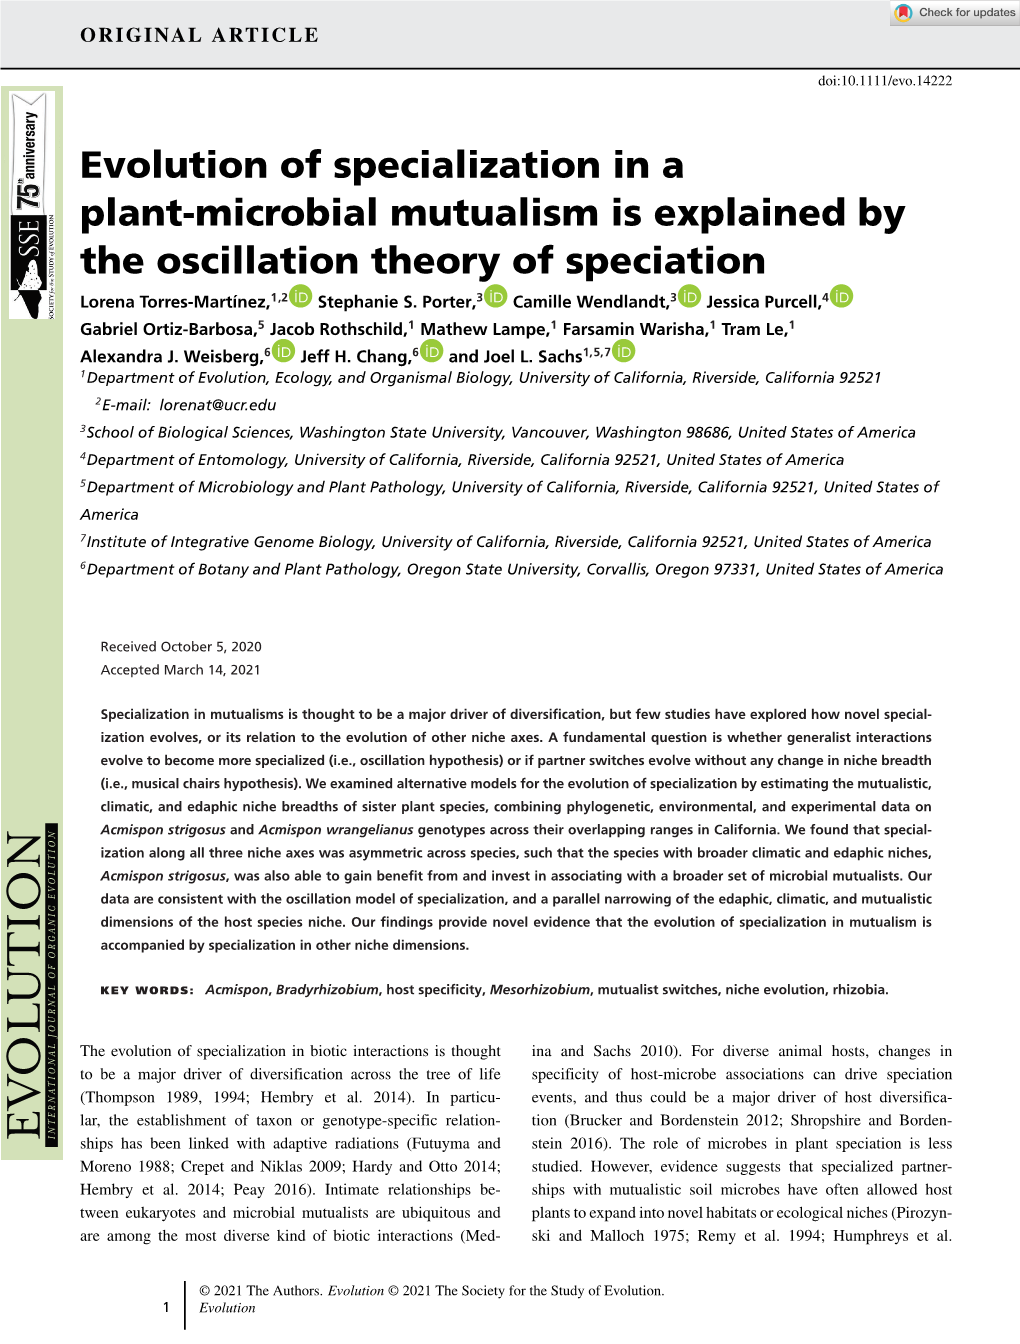 Evolution of Specialization in a Plant‐Microbial Mutualism Is Explained